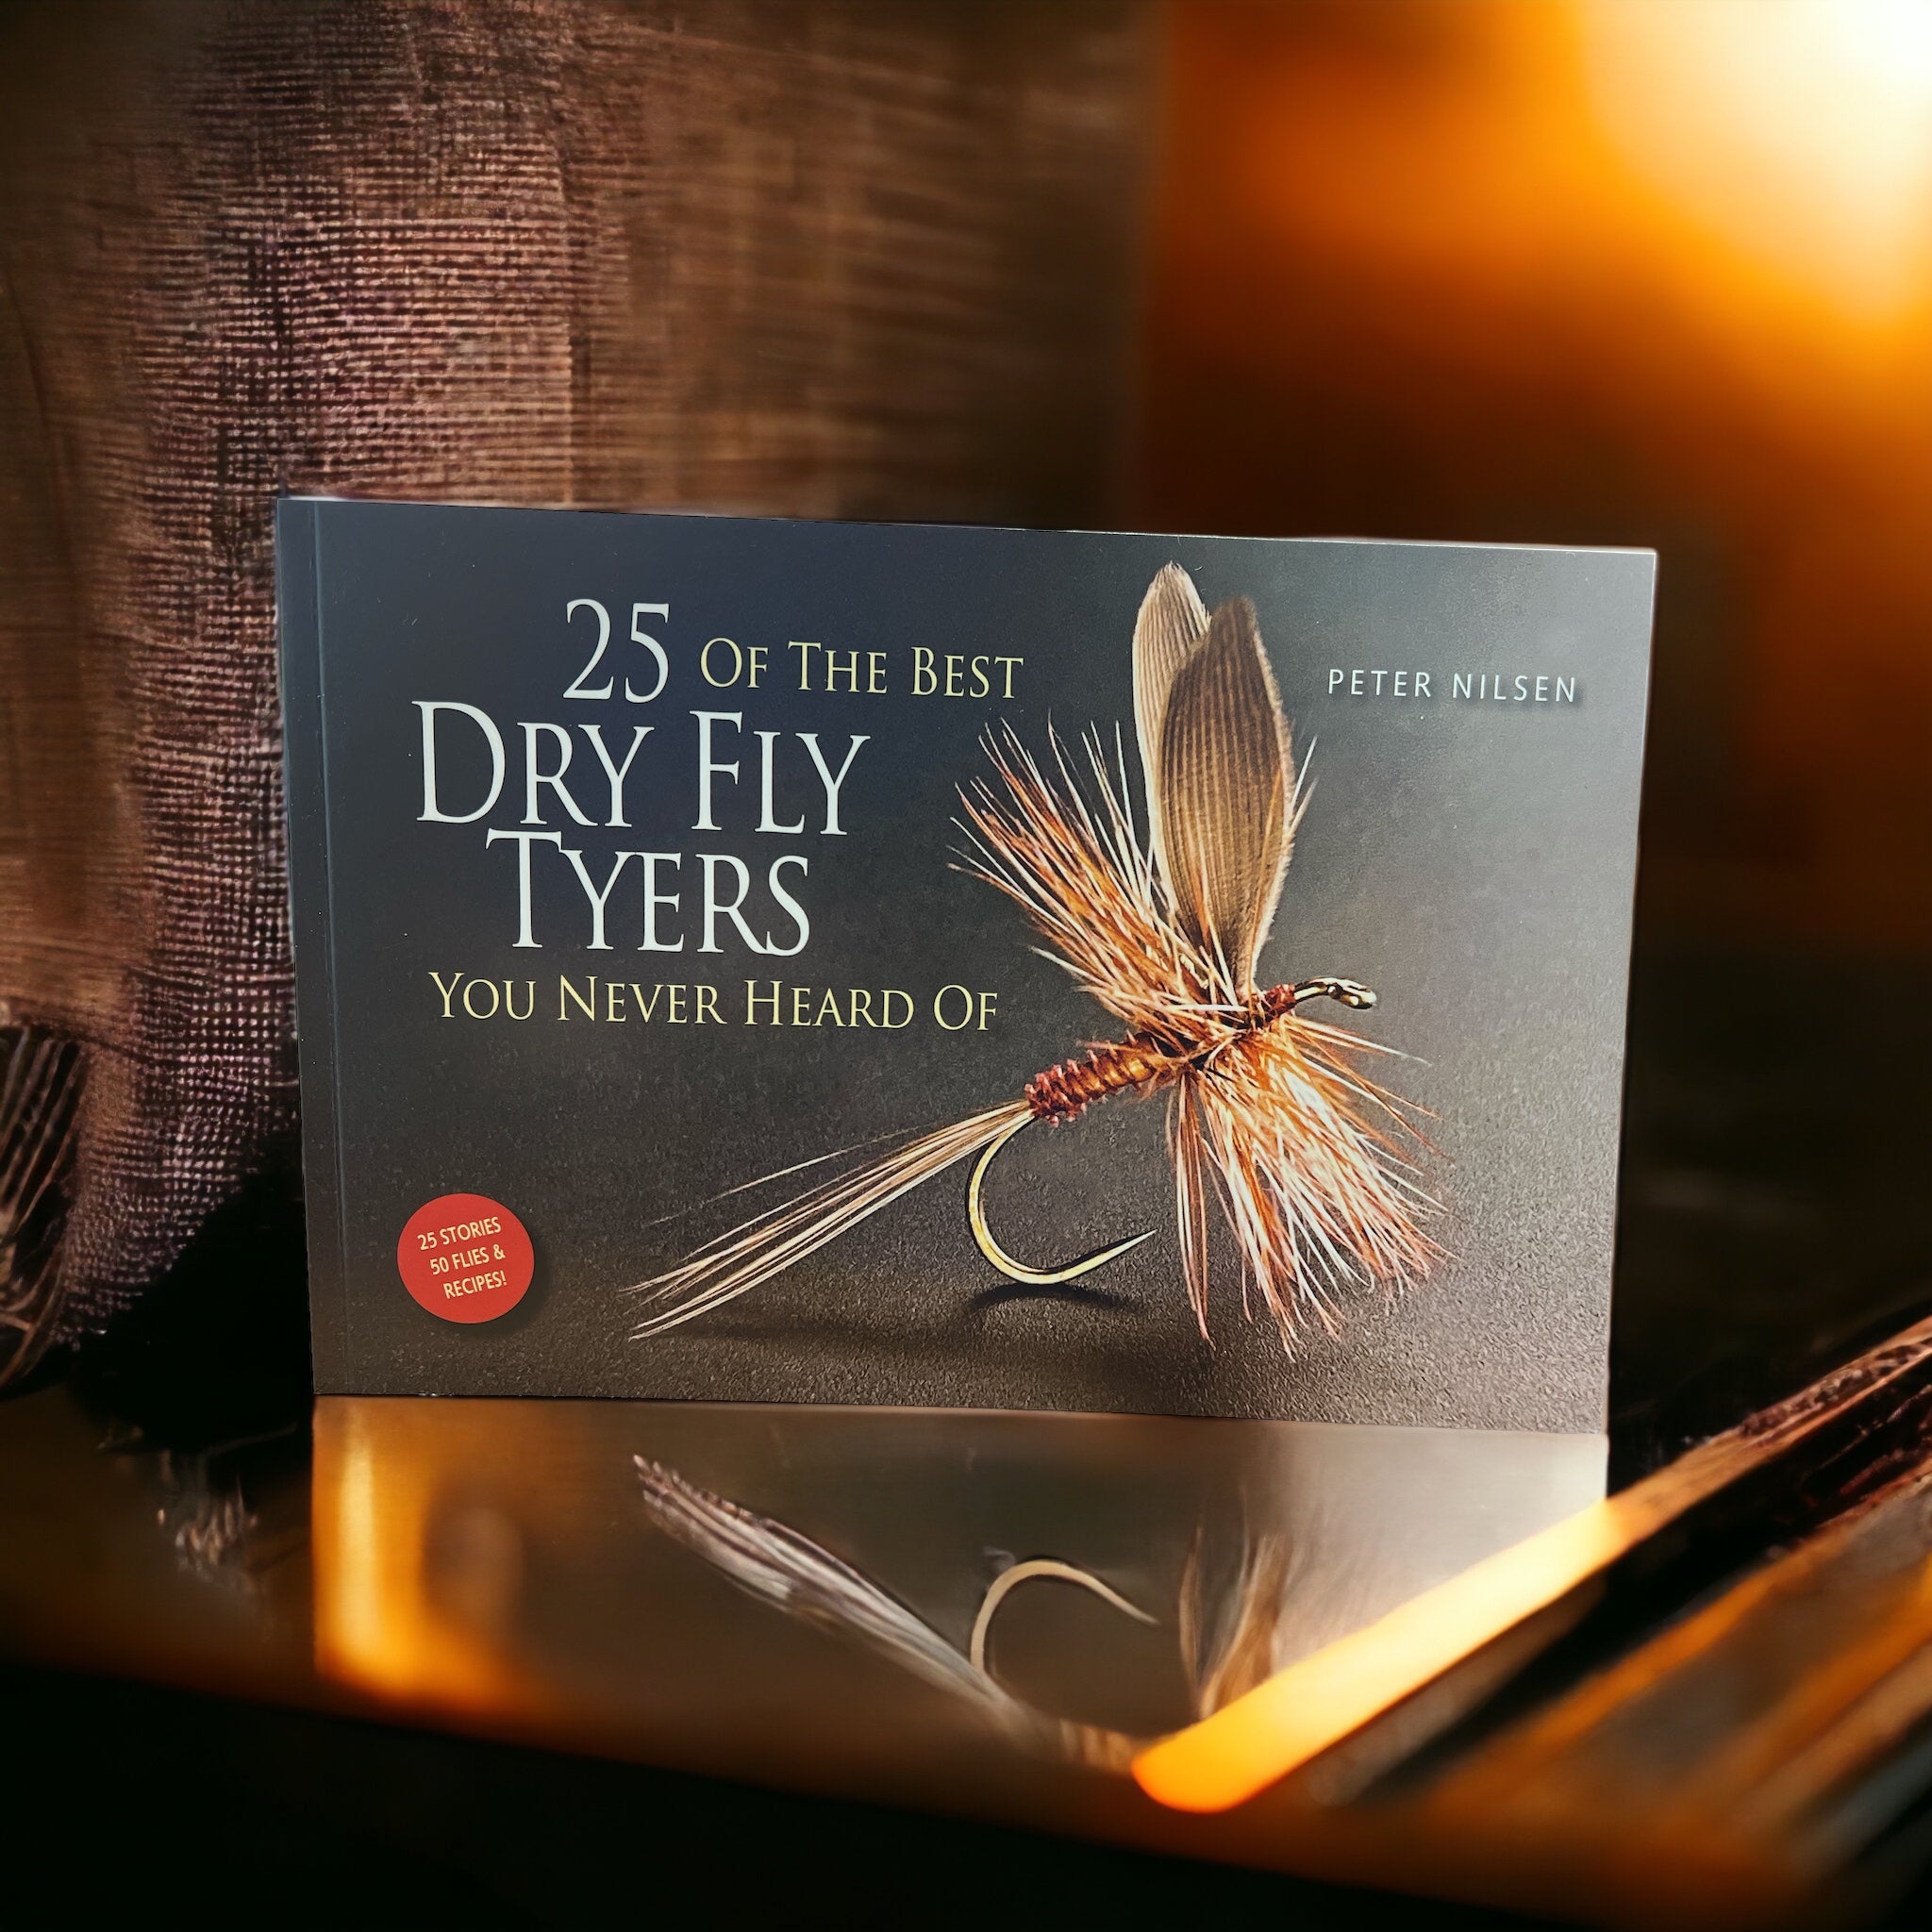 25 Of The Best Dry Fly Tyers You Never Heard Of By: Peter Nilsen